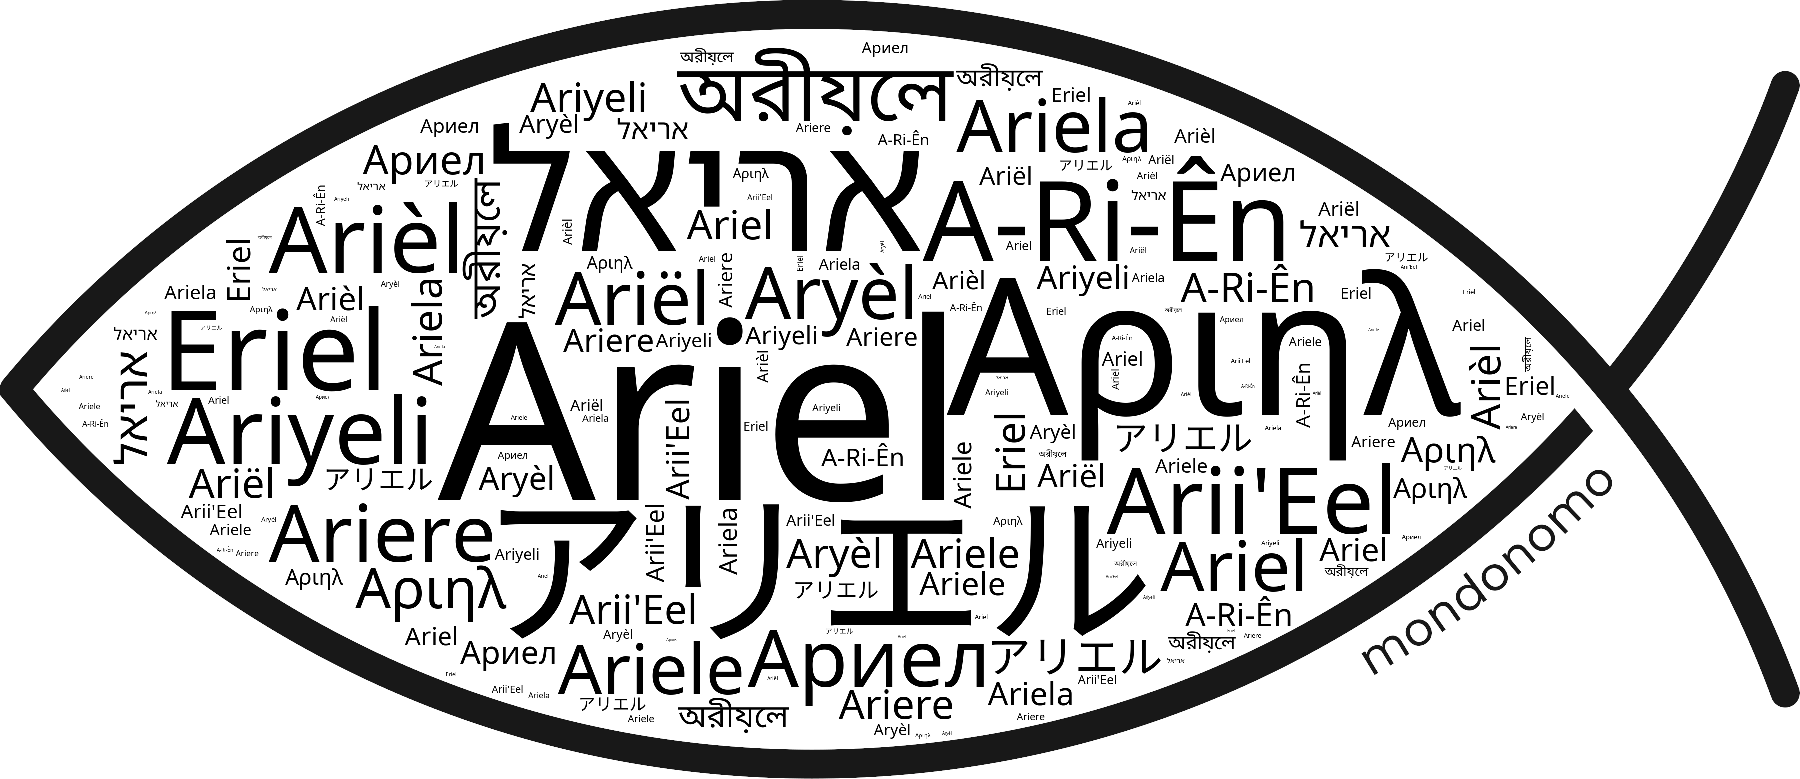 Name Ariel in the world's Bibles